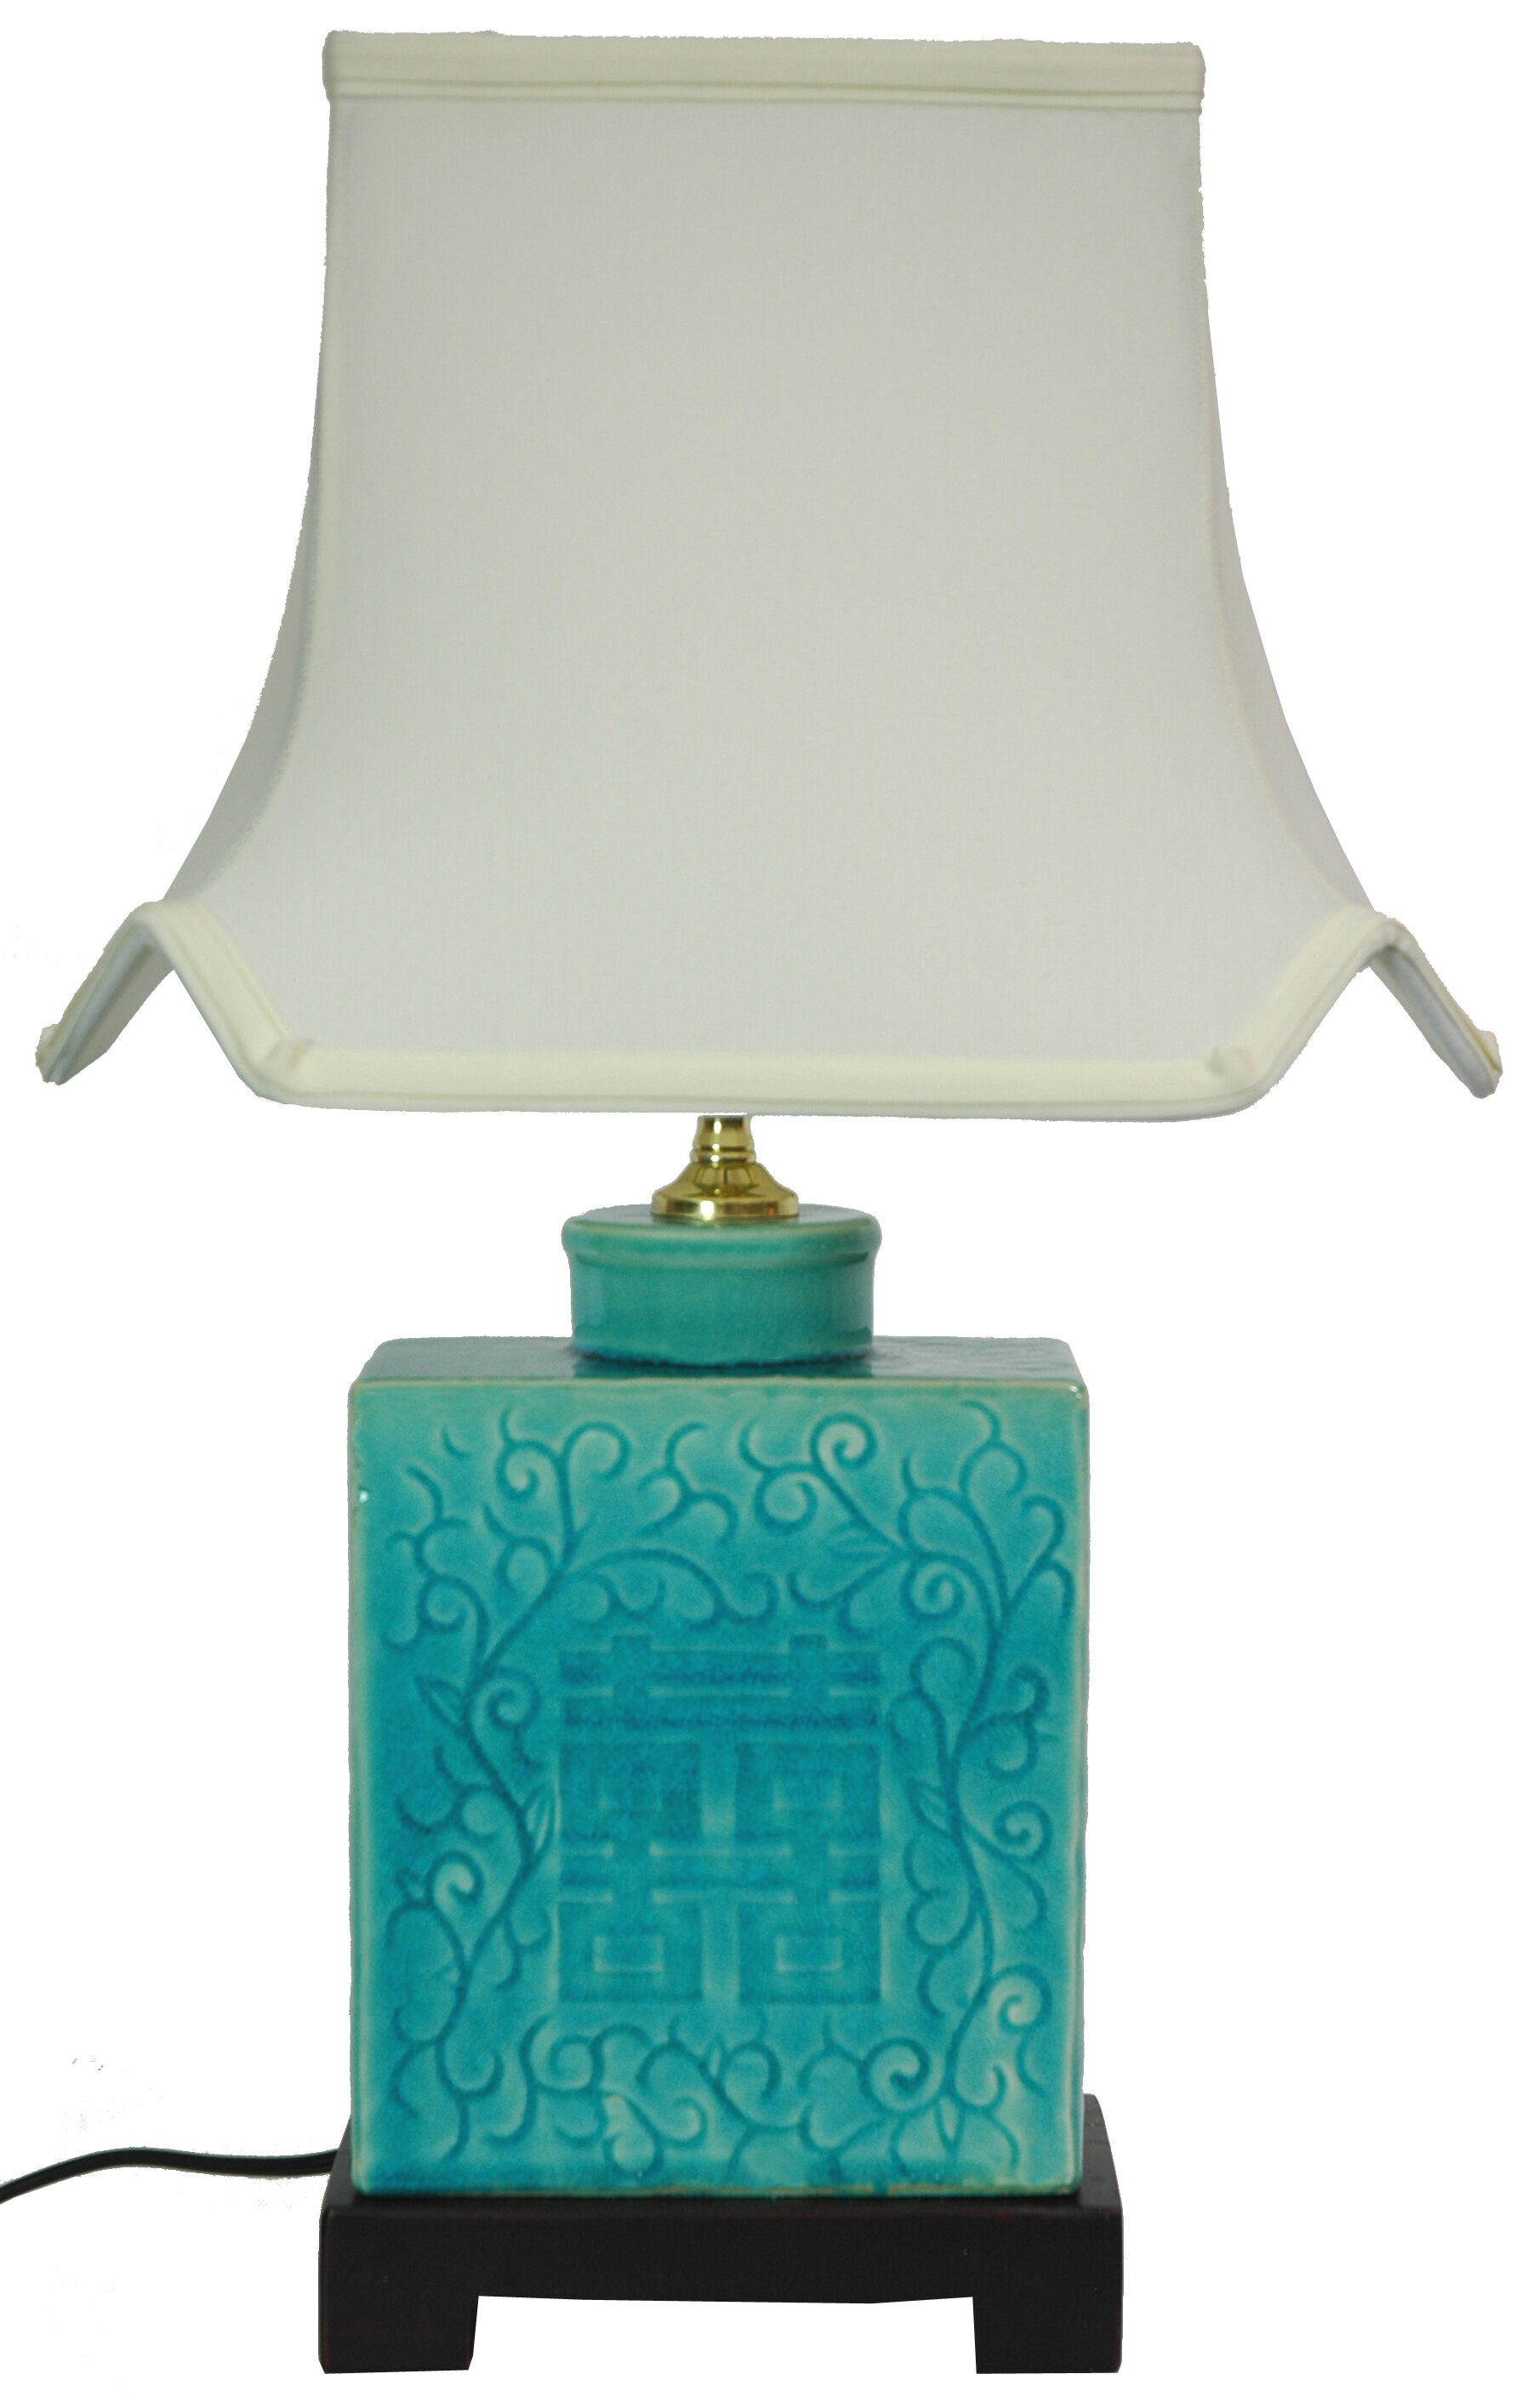 Oriental furniture 20 5 h table lamp with bell shade